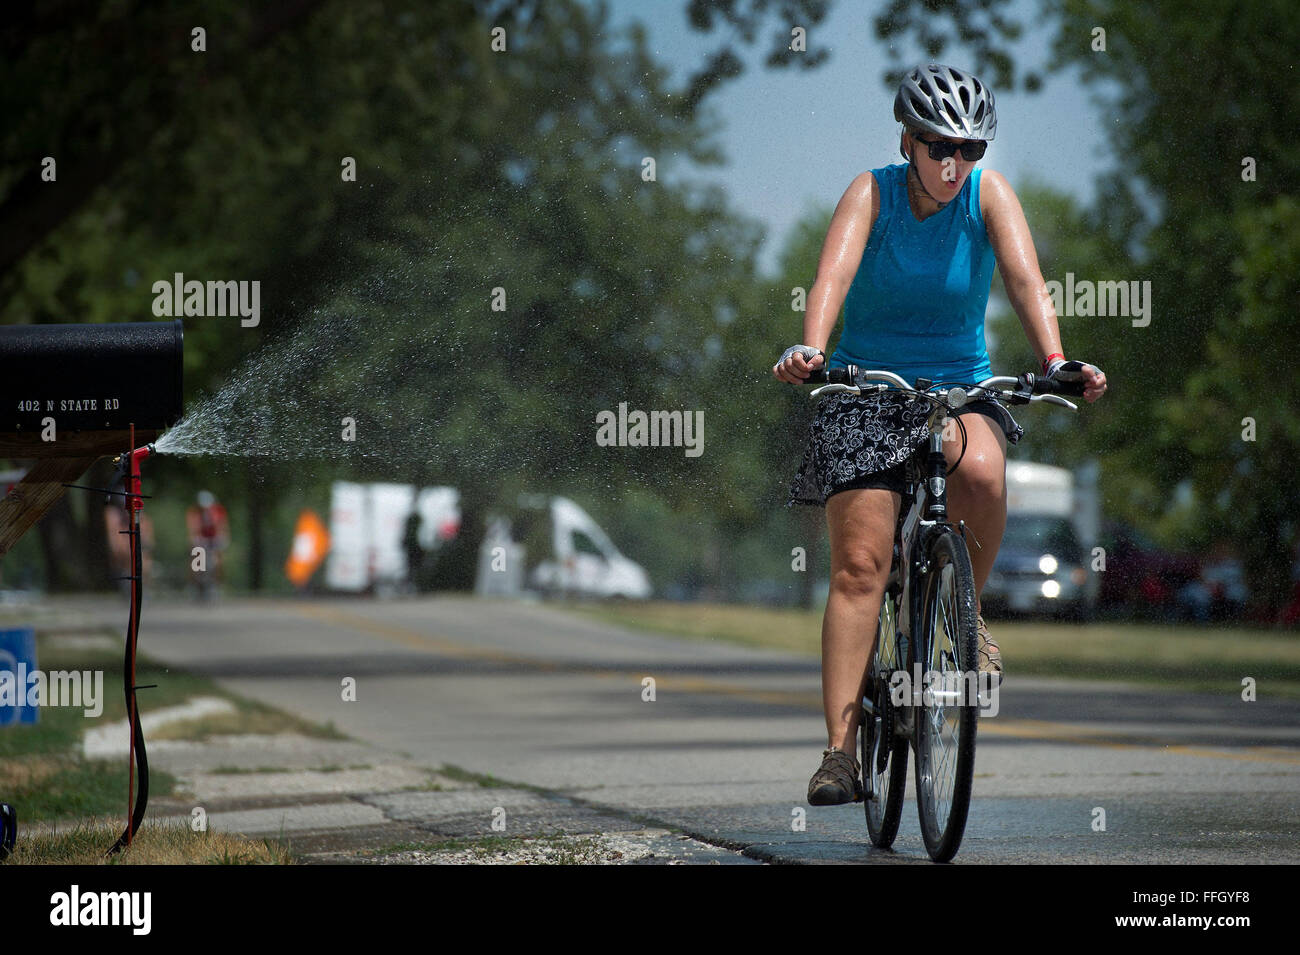 A RAGBRAI participant passes through a stream of water set out by a local resident of Lake View, Iowa. The temperatures each day rose past 100 degrees, and many of the residents set up garden hoses to cool off the passing cyclists. Stock Photo